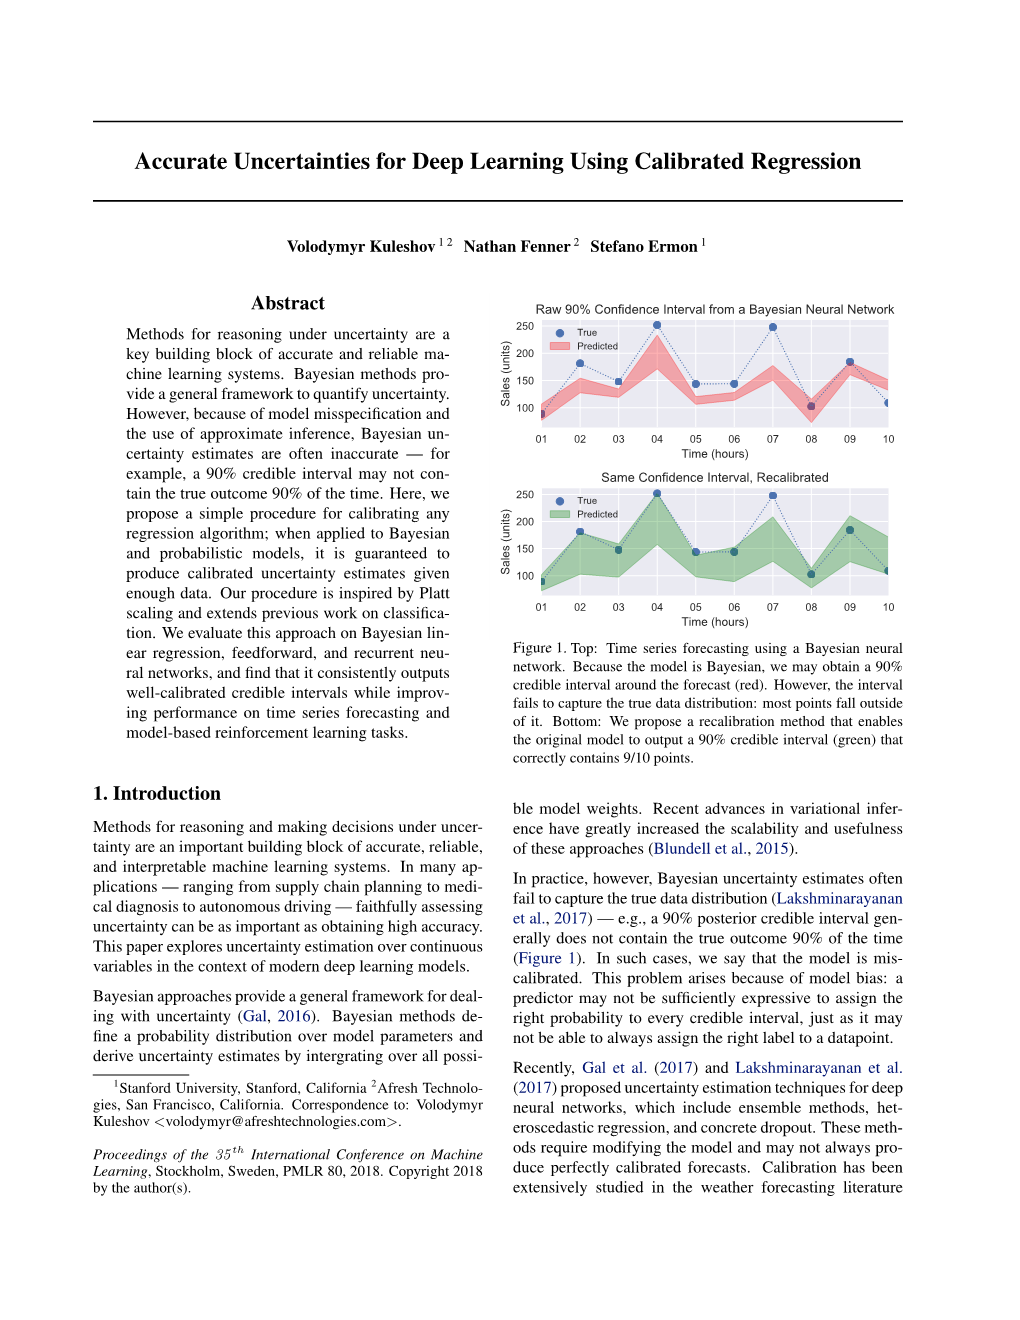 Accurate Uncertainties for Deep Learning Using Calibrated Regression